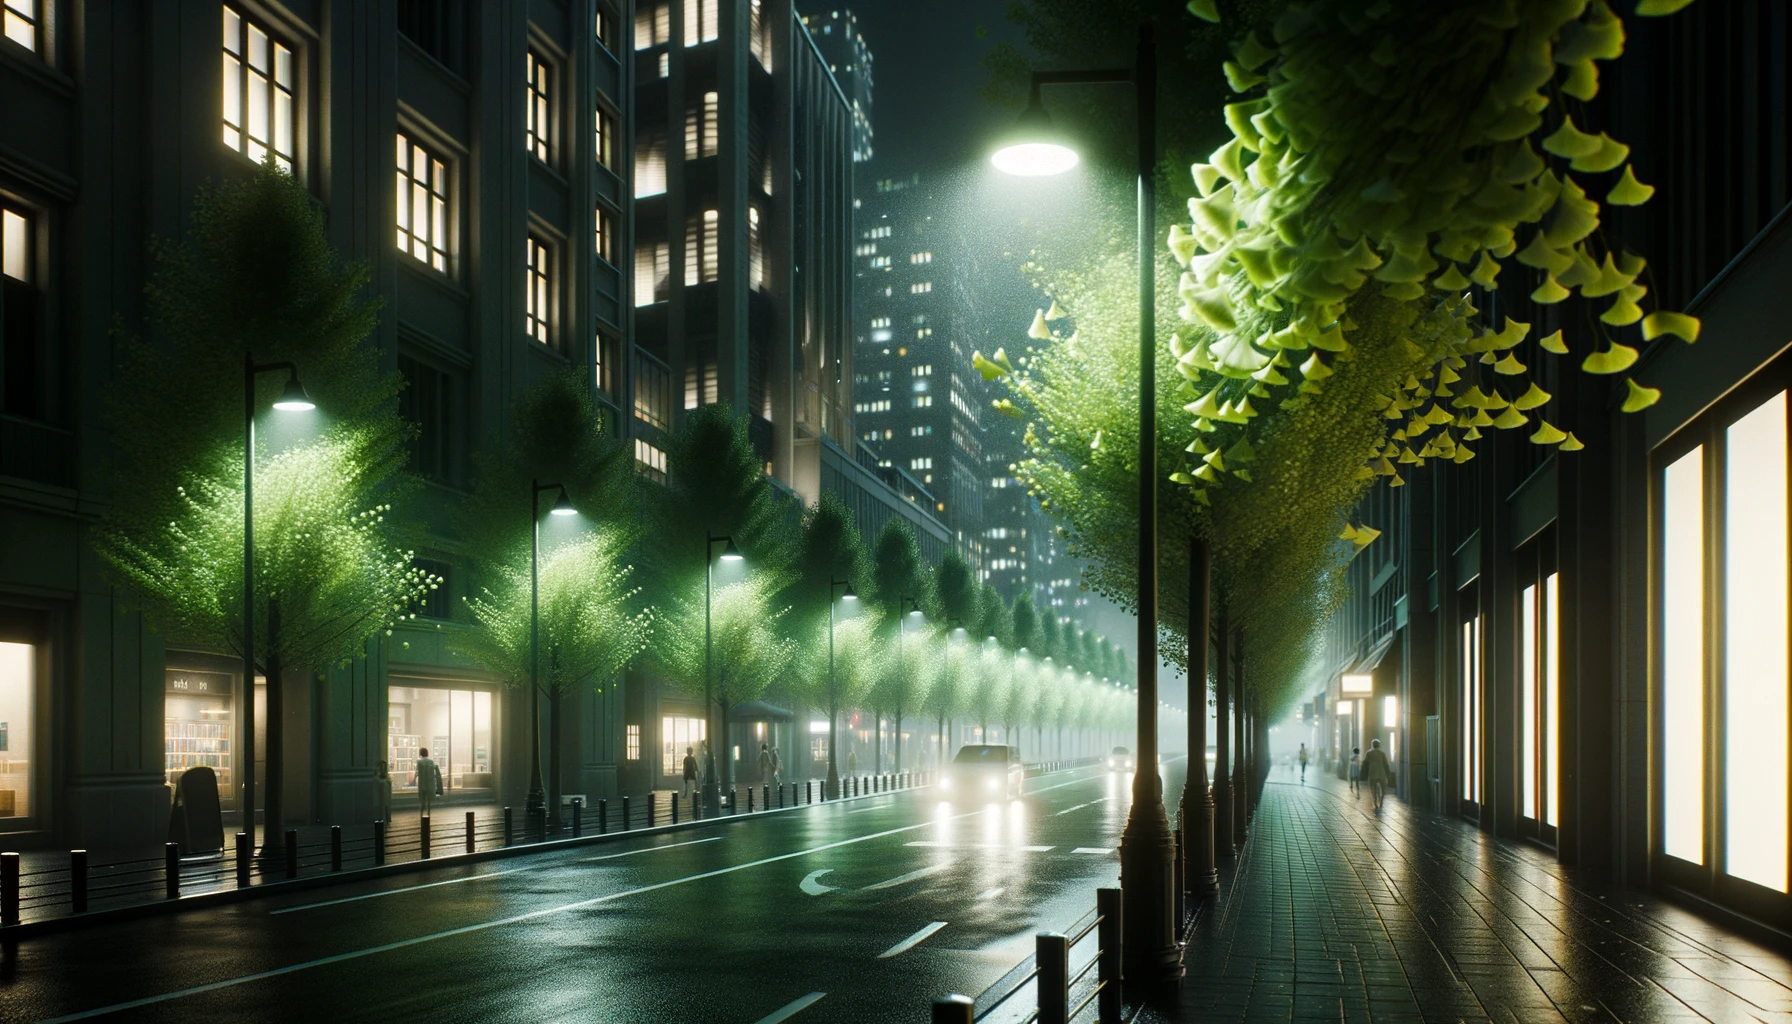 Render of a city street at night, illuminated only by the faint light from windows and lampposts. The green ginkgo trees on the sidewalk sway and rustle as a gust of wind passes through.